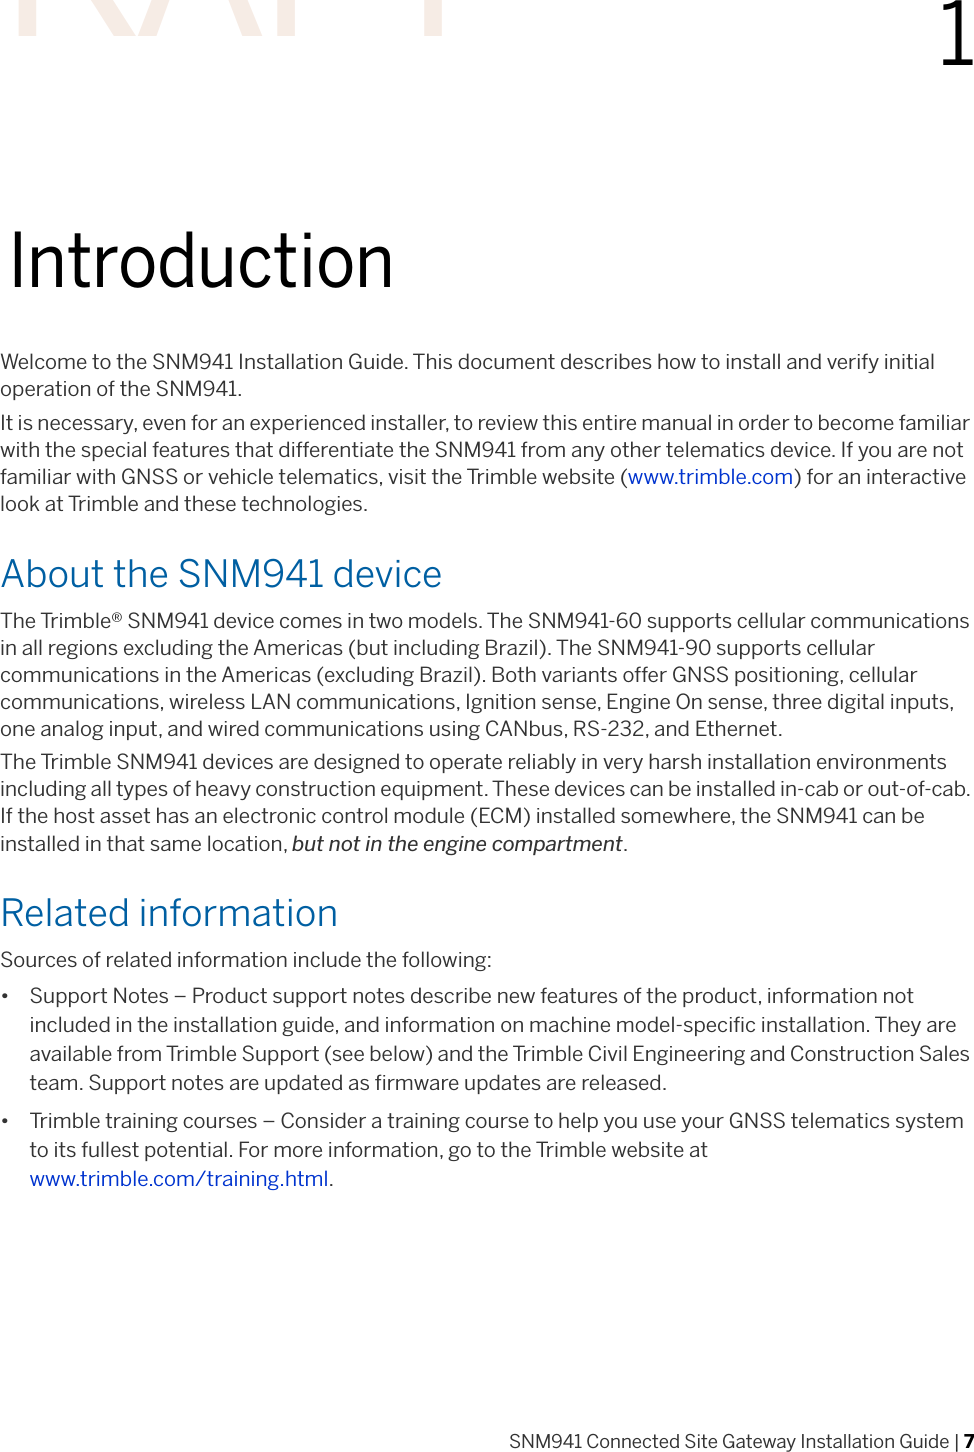 SNM941 Connected Site Gateway Installation Guide | 711IntroductionWelcome to the SNM941 Installation Guide. This document describes how to install and verify initial operation of the SNM941. It is necessary, even for an experienced installer, to review this entire manual in order to become familiar with the special features that differentiate the SNM941 from any other telematics device. If you are not familiar with GNSS or vehicle telematics, visit the Trimble website (www.trimble.com) for an interactive look at Trimble and these technologies.About the SNM941 deviceThe Trimble® SNM941 device comes in two models. The SNM941-60 supports cellular communications in all regions excluding the Americas (but including Brazil). The SNM941-90 supports cellular communications in the Americas (excluding Brazil). Both variants offer GNSS positioning, cellular communications, wireless LAN communications, Ignition sense, Engine On sense, three digital inputs, one analog input, and wired communications using CANbus, RS-232, and Ethernet. The Trimble SNM941 devices are designed to operate reliably in very harsh installation environments including all types of heavy construction equipment. These devices can be installed in-cab or out-of-cab. If the host asset has an electronic control module (ECM) installed somewhere, the SNM941 can be installed in that same location, but not in the engine compartment. Related informationSources of related information include the following:• Support Notes – Product support notes describe new features of the product, information not included in the installation guide, and information on machine model-specific installation. They are available from Trimble Support (see below) and the Trimble Civil Engineering and Construction Sales team. Support notes are updated as firmware updates are released. • Trimble training courses – Consider a training course to help you use your GNSS telematics system to its fullest potential. For more information, go to the Trimble website at www.trimble.com/training.html.DRAFT